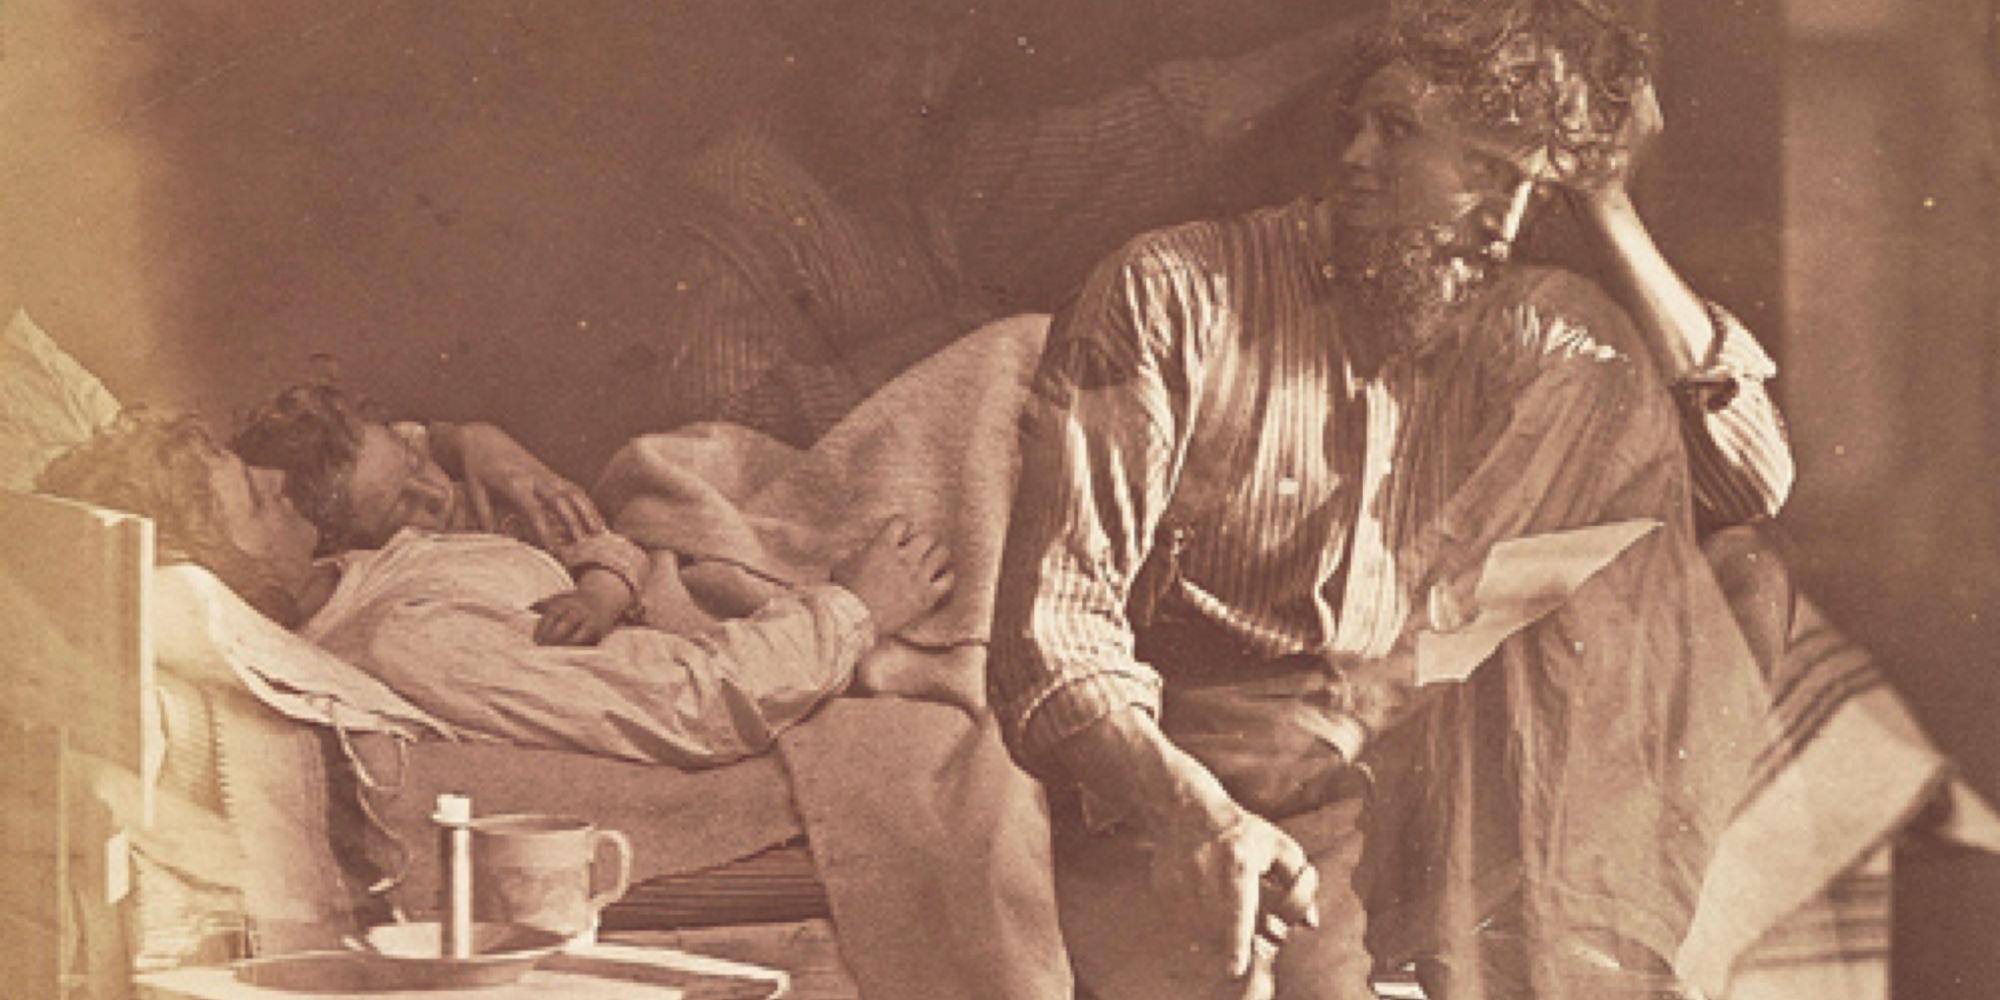 Hard Times the innovative photograph by renowned photographer Oscar Gustav Rejlander. Named after the novel of the same name by Charles Dickens.. Image shot 1860. Exact date unknown.